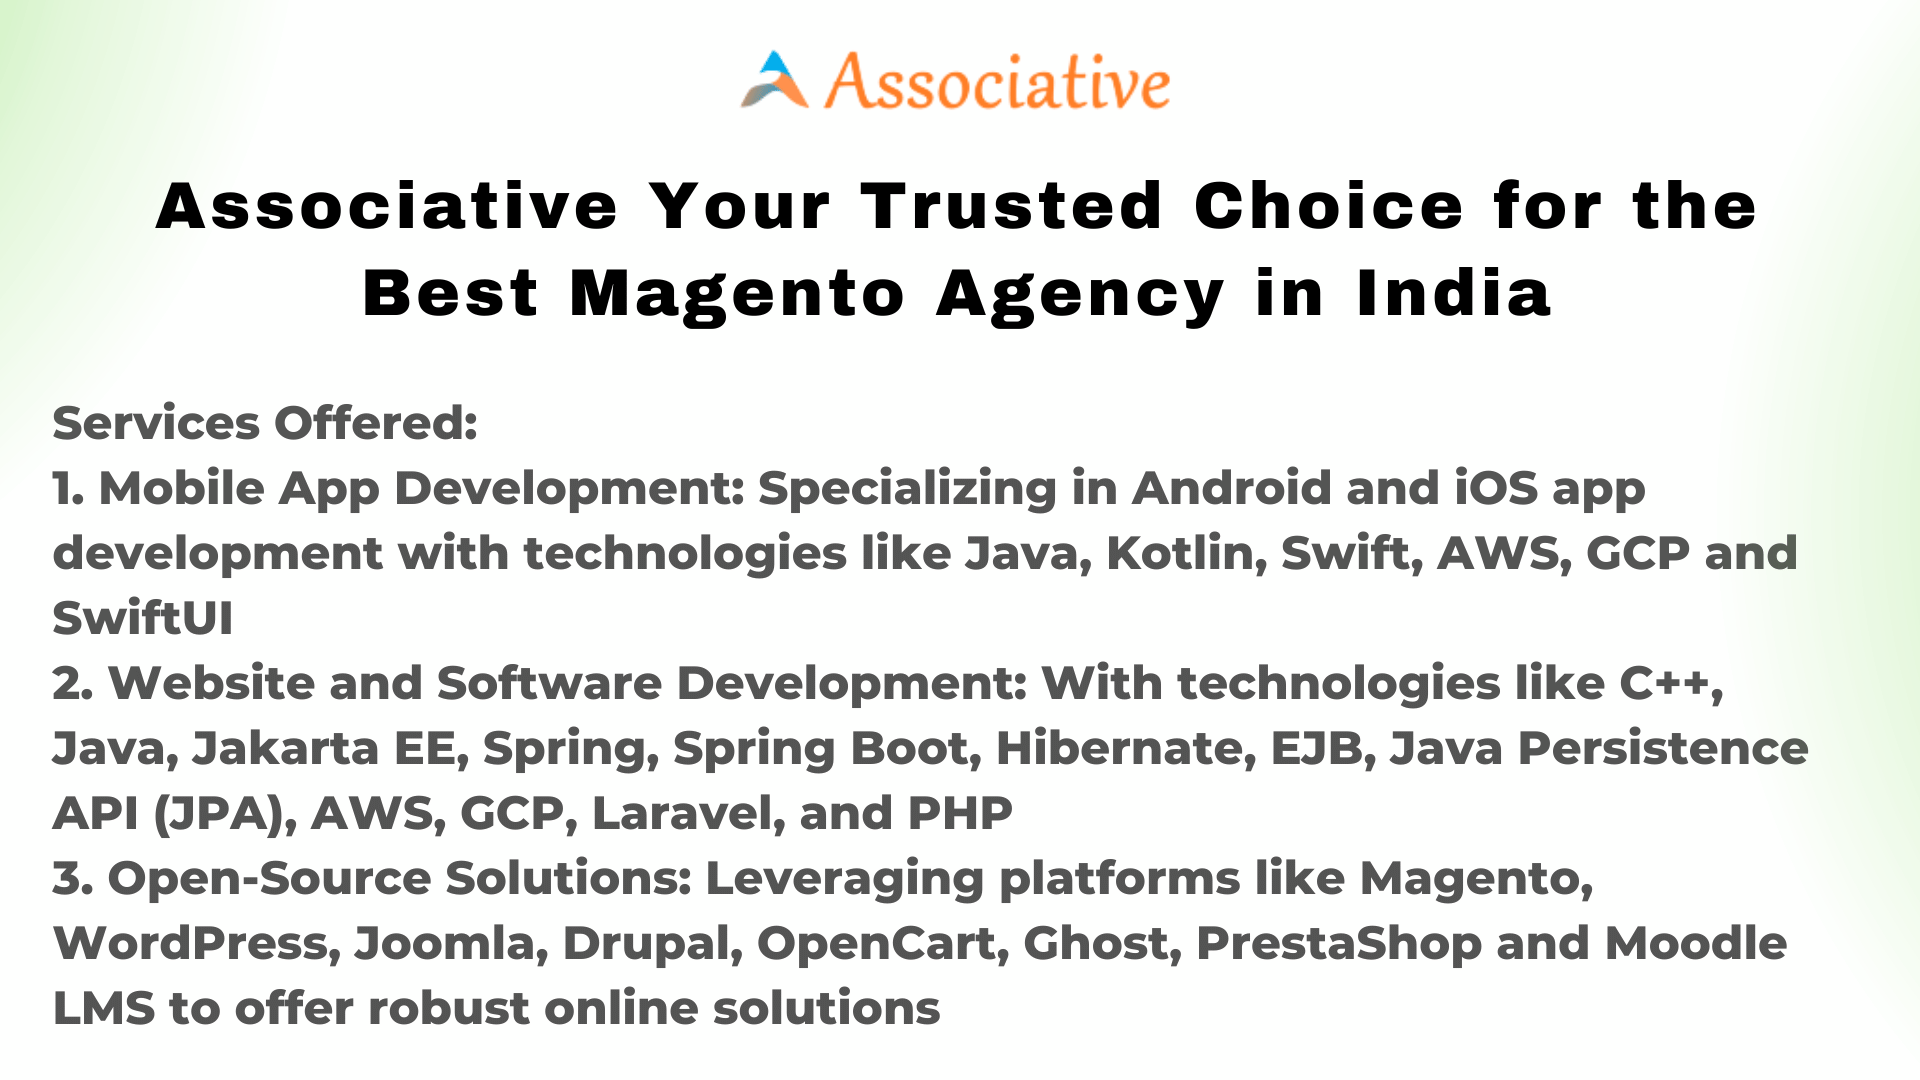 Associative Your Trusted Choice for the Best Magento Agency in India